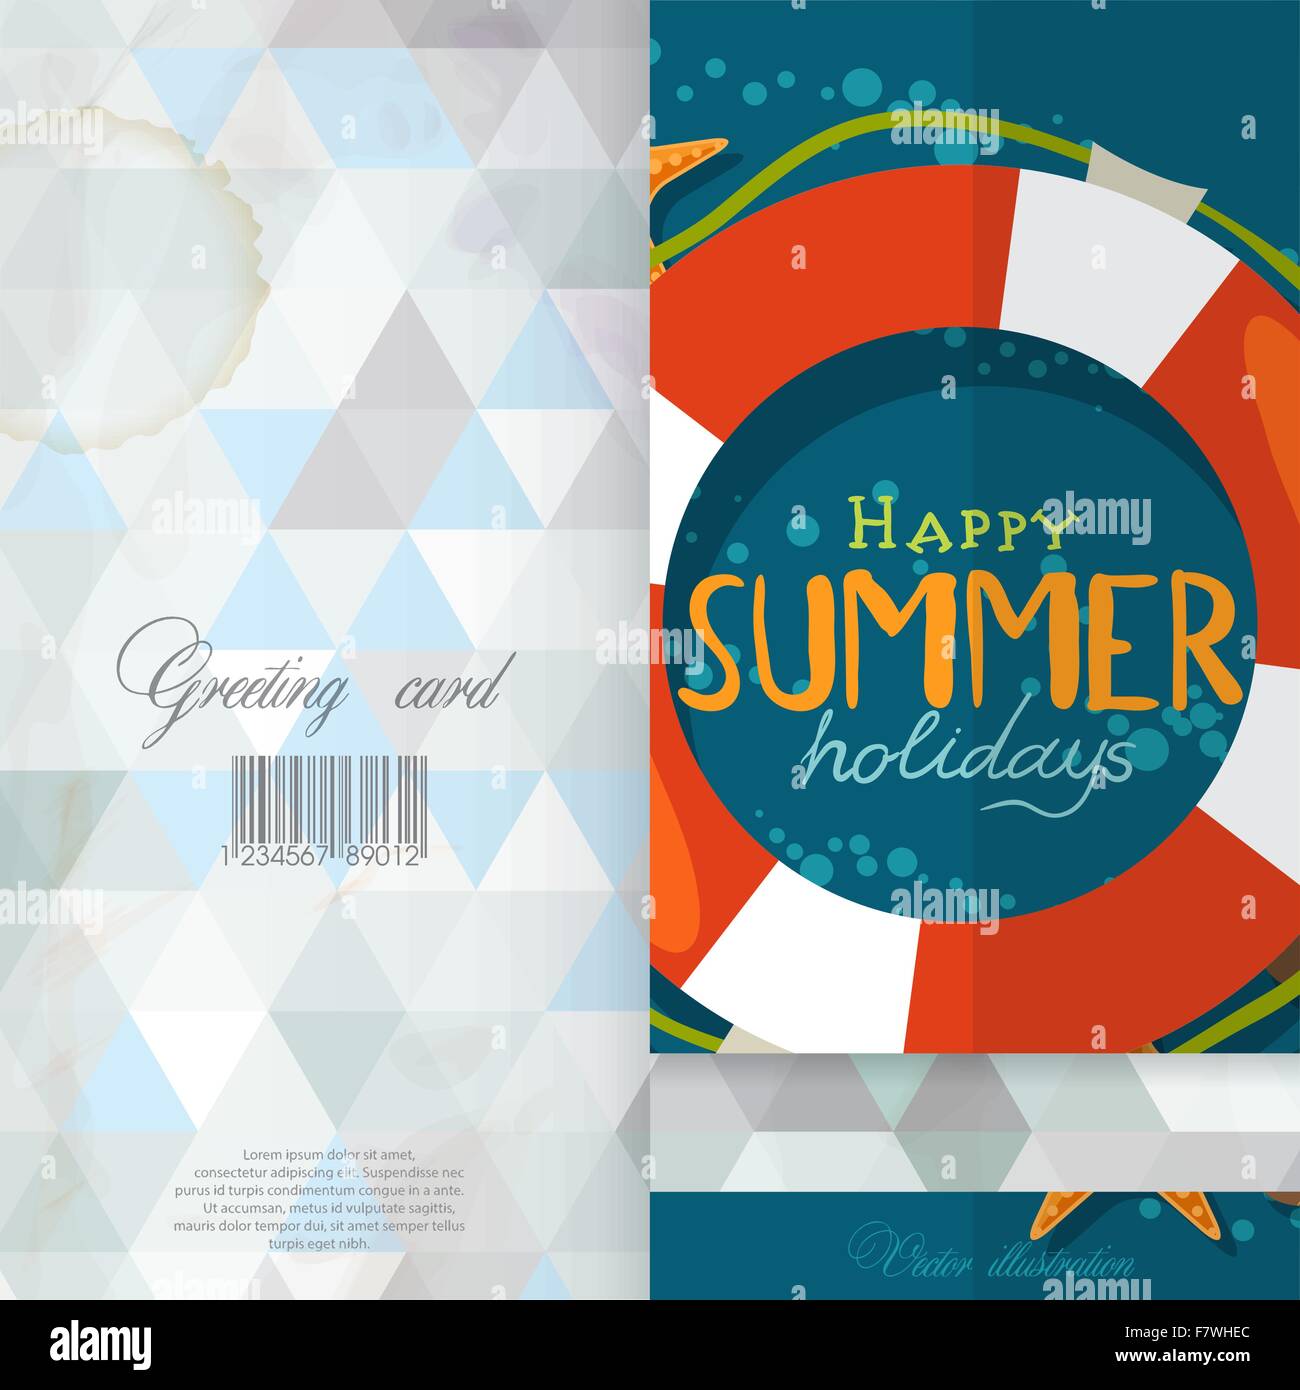 Greeting Card Design, Template Stock Vector